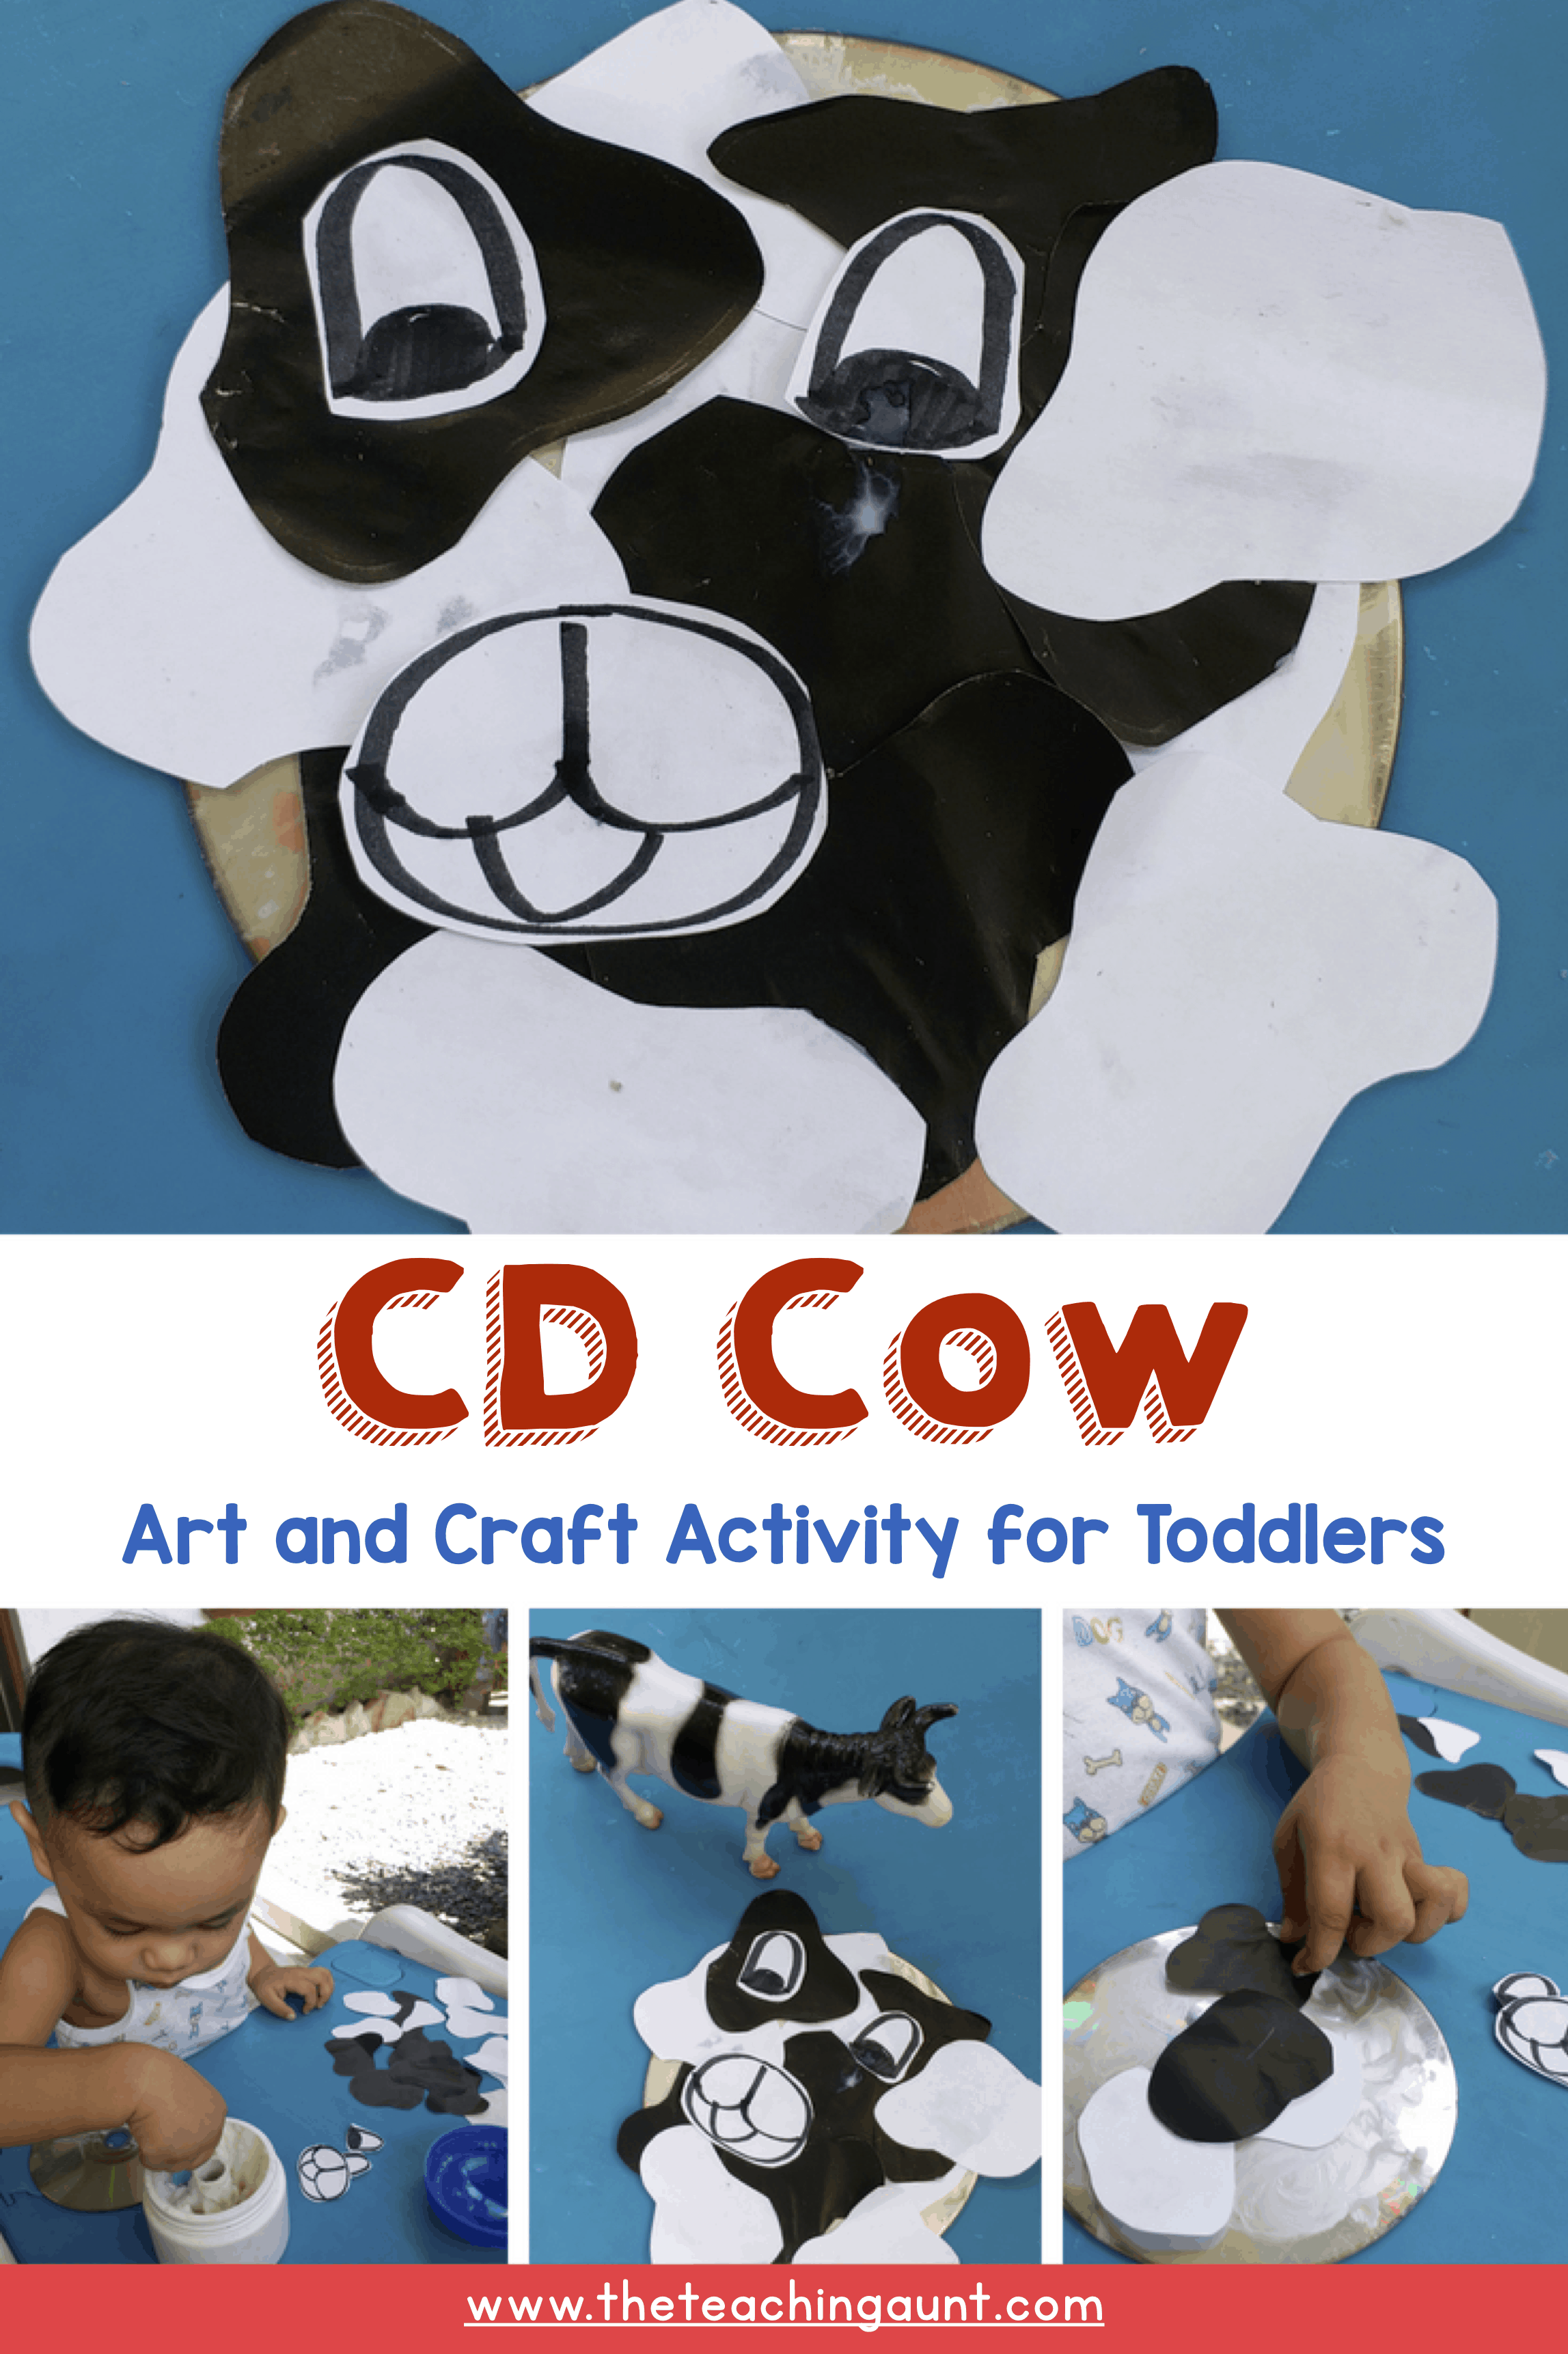 Cow CD Art and Craft